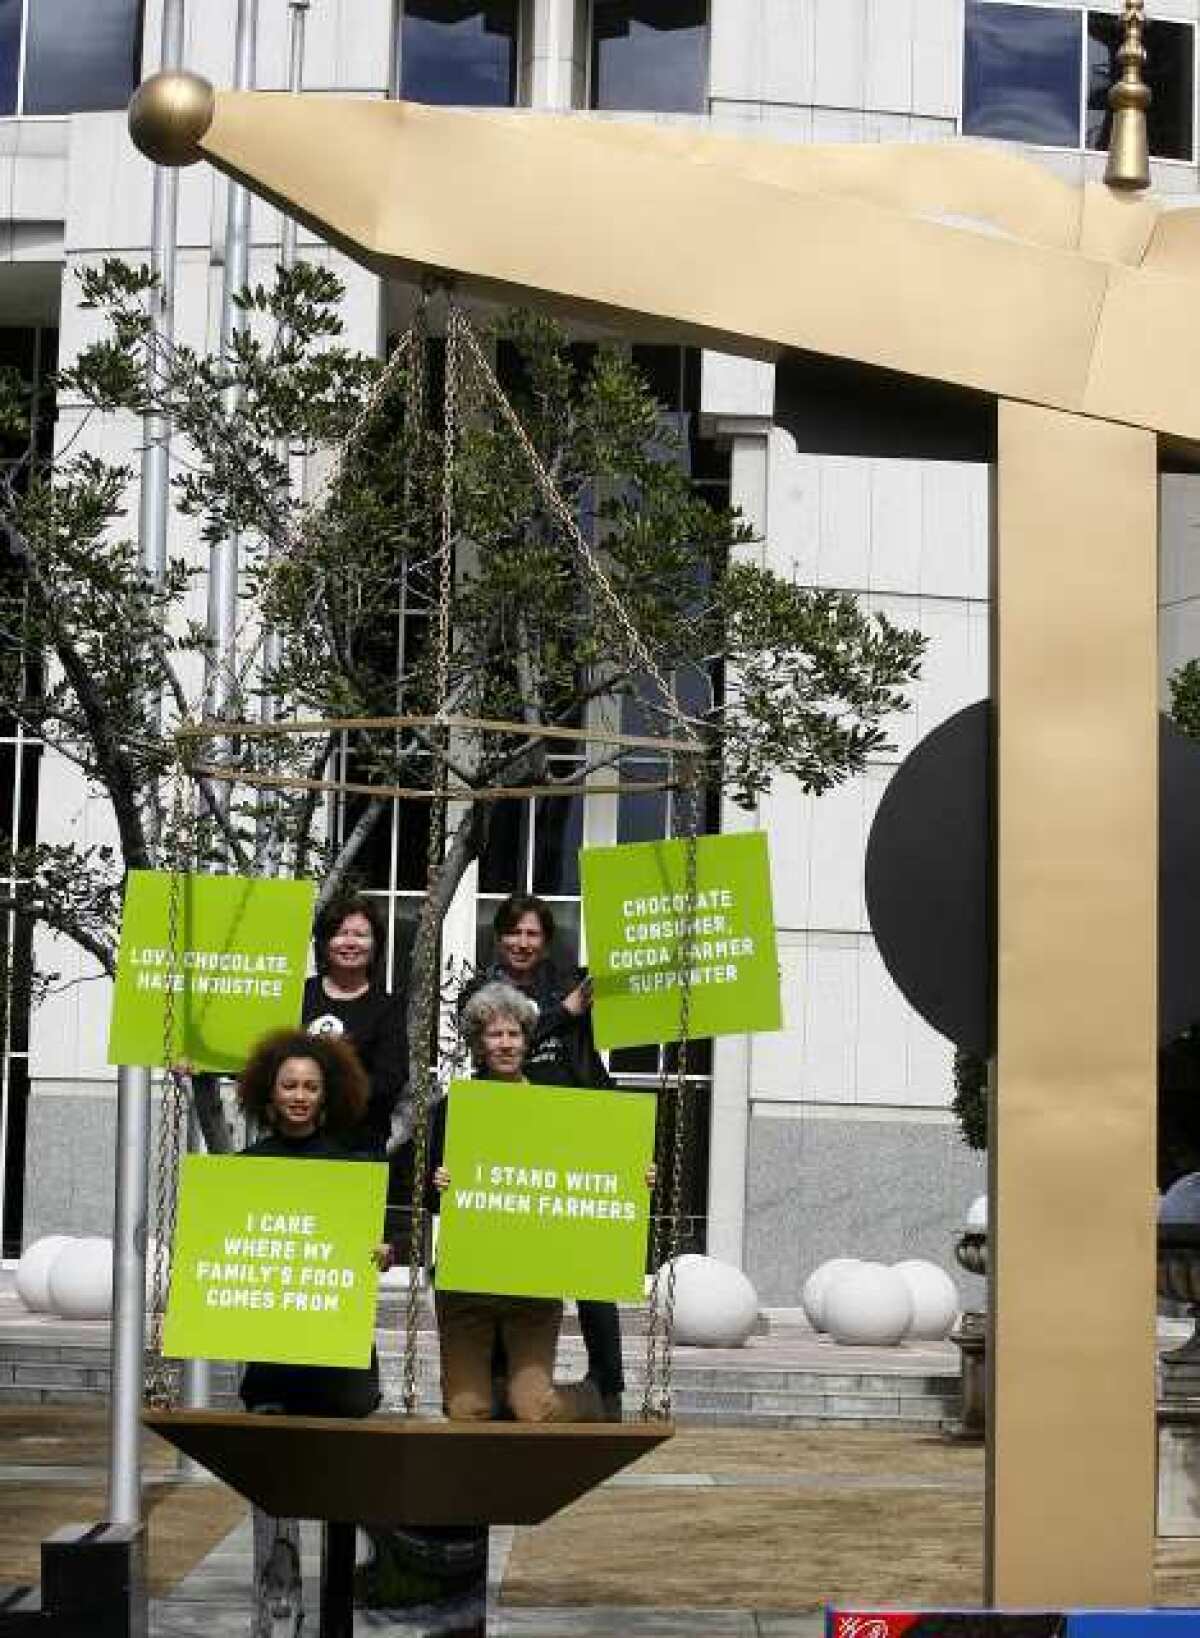 Ramona Wright of Los Angeles, along with Judy Beals, Liz Carty and Irit Tamir of Boston, protest in front of the Nestle headquarters in Glendale. The Oxfam America protesters set up a giant scale to bring attention to the unfair treatment of women cocoa workers worldwide.